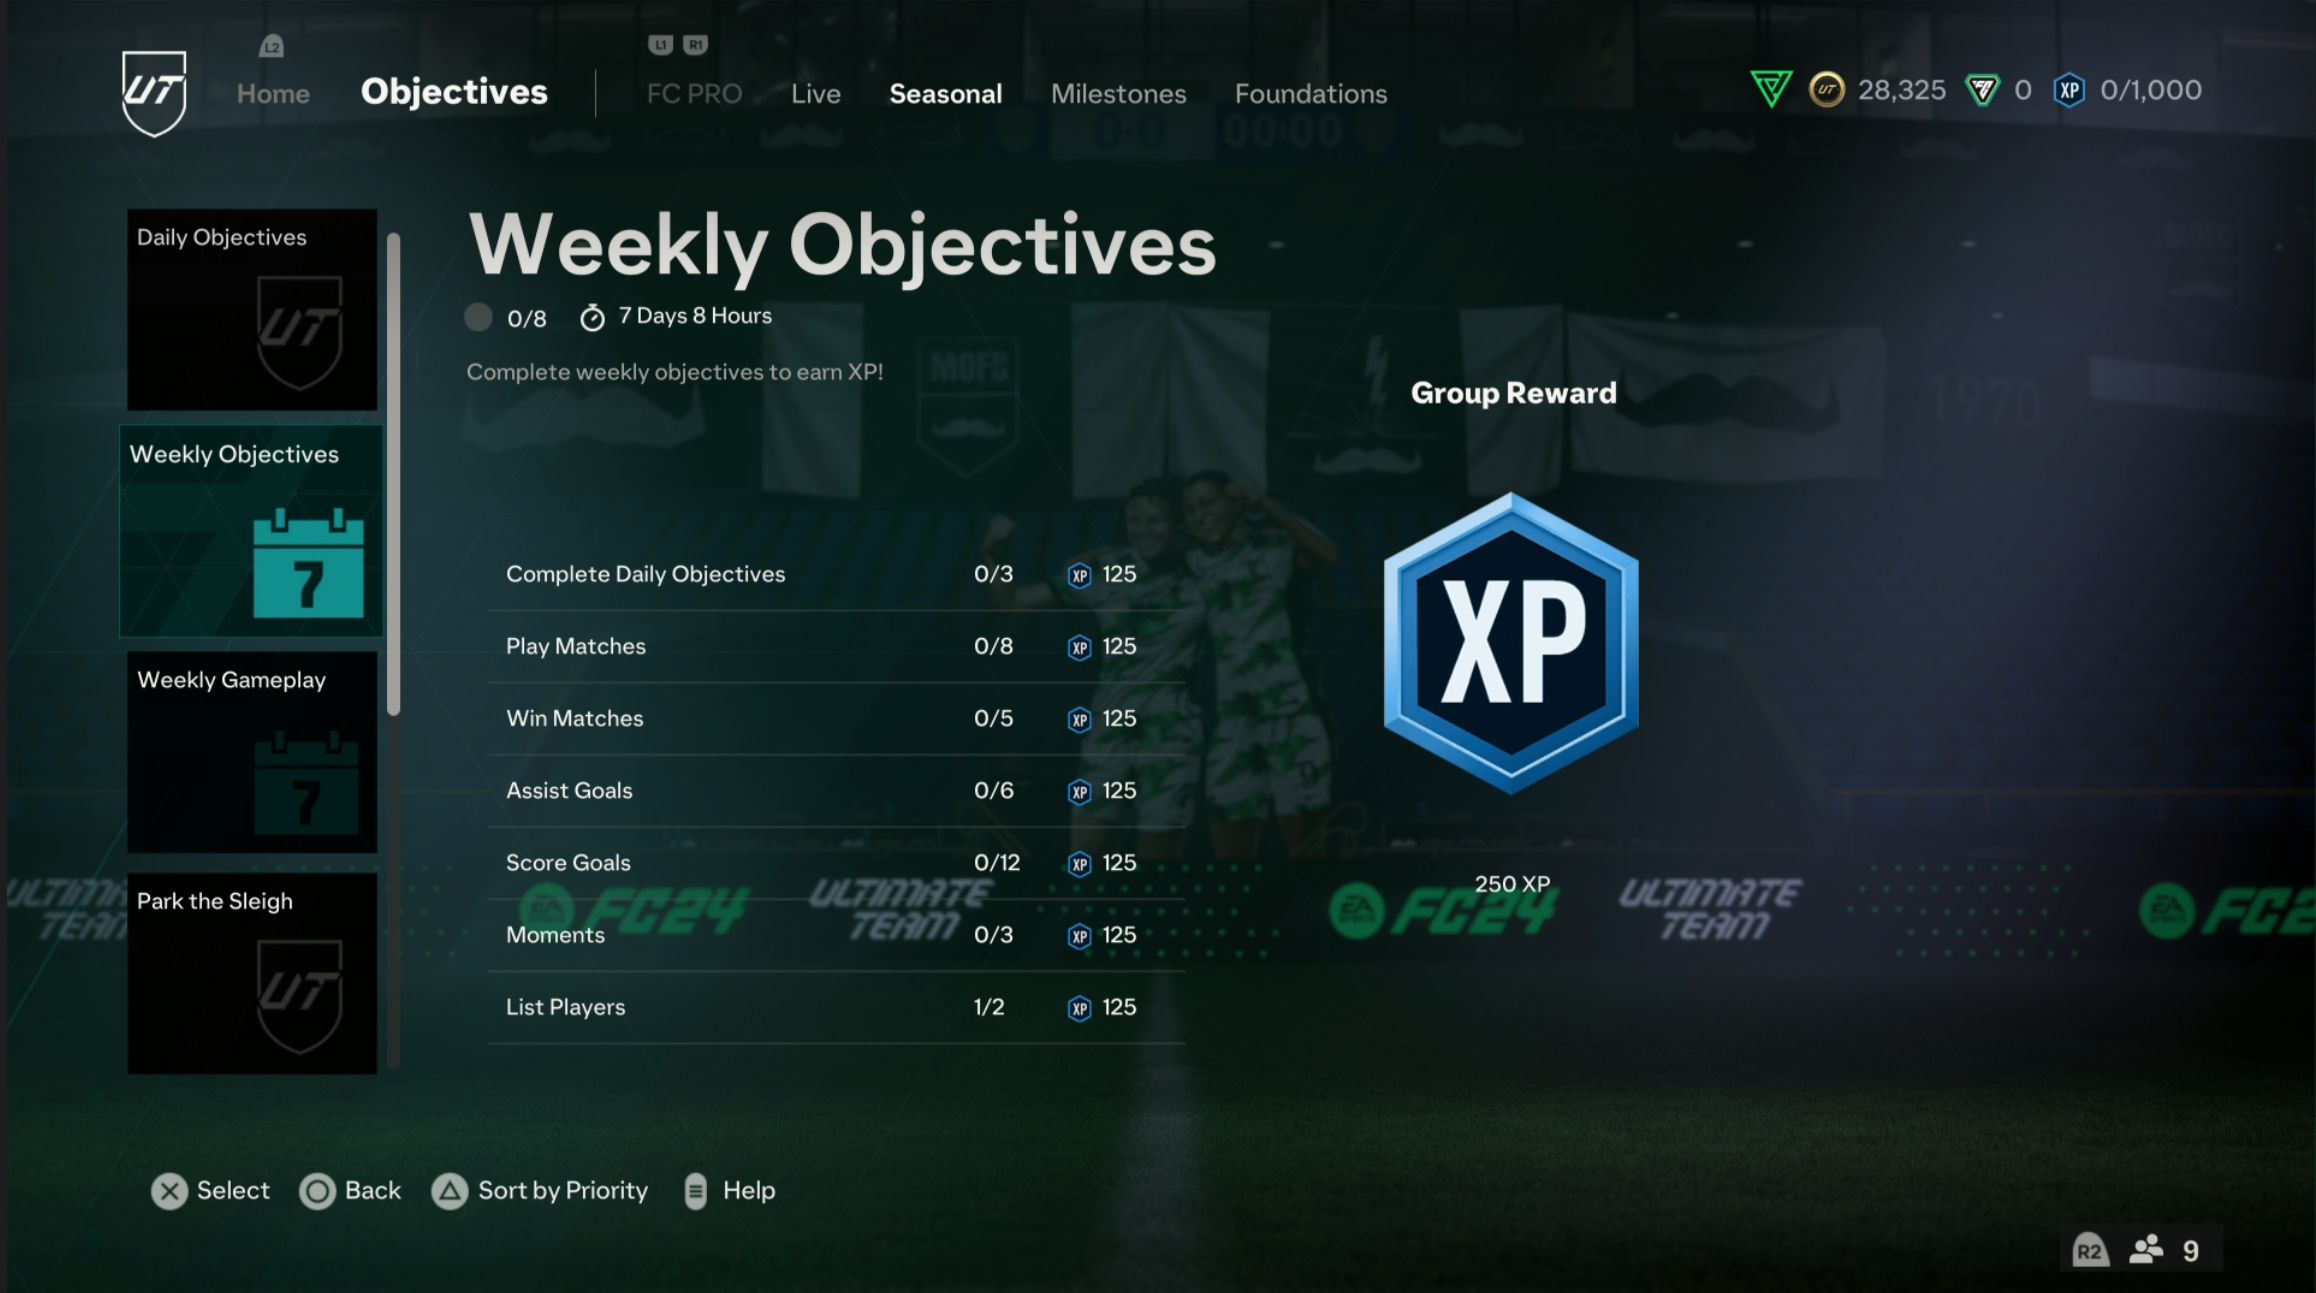 Weekly Objectives